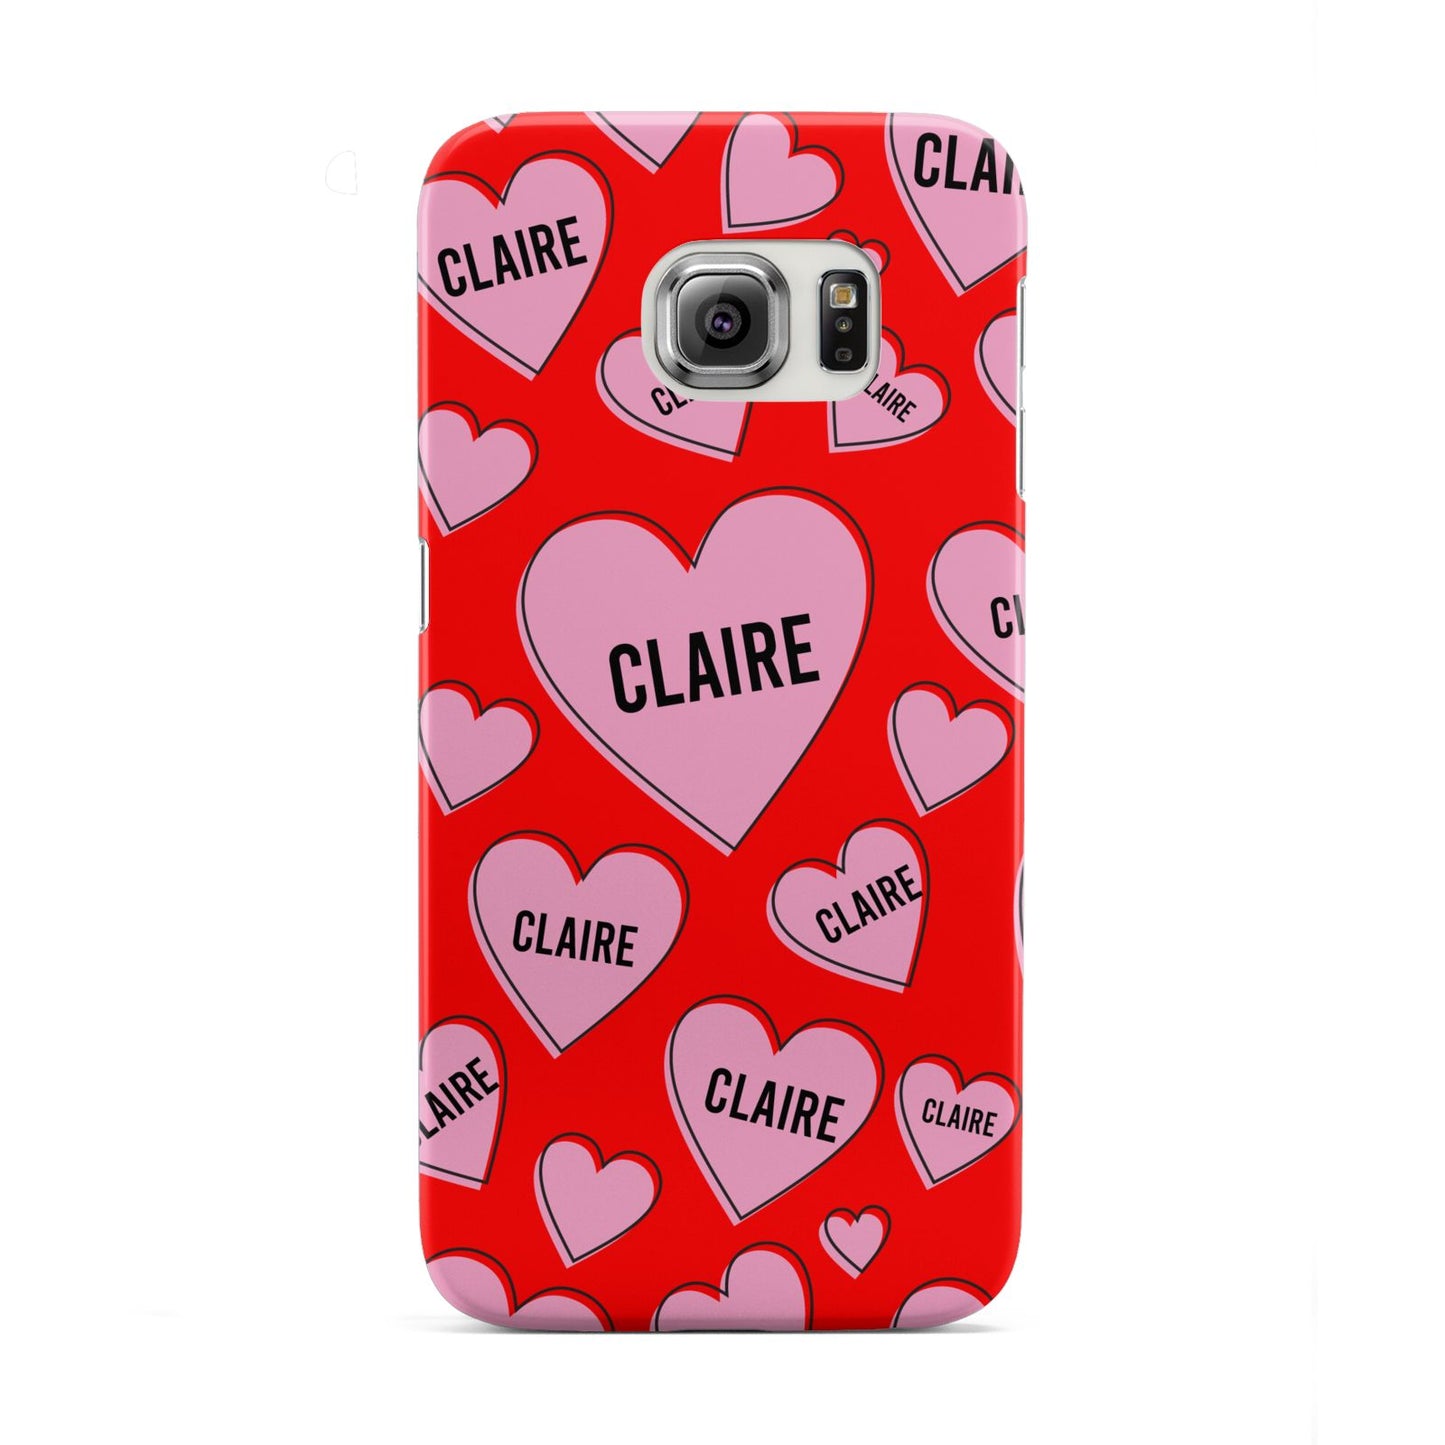 Personalised Hearts Samsung Galaxy S6 Edge Case